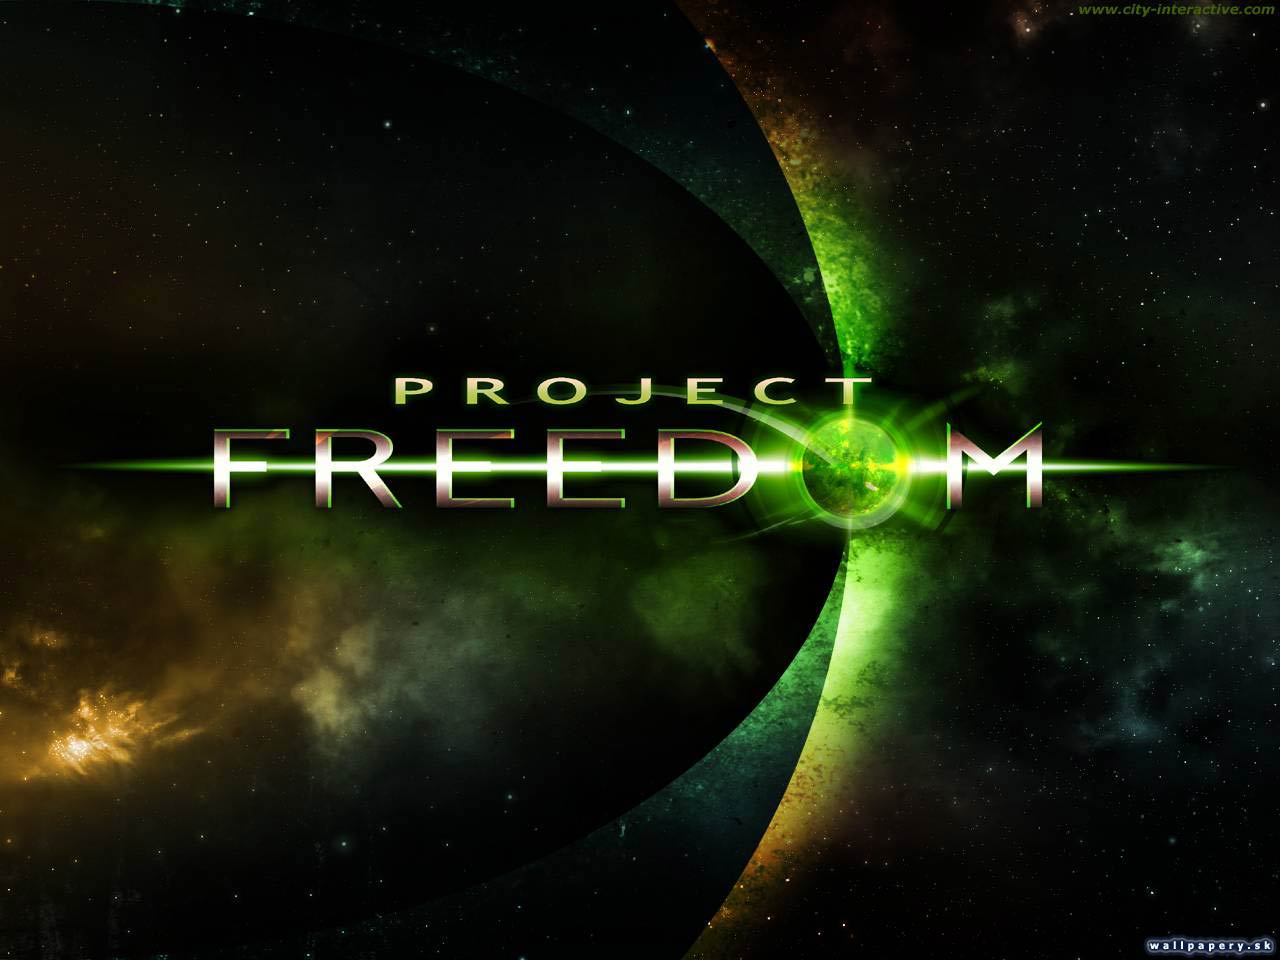 Project Freedom - wallpaper 1